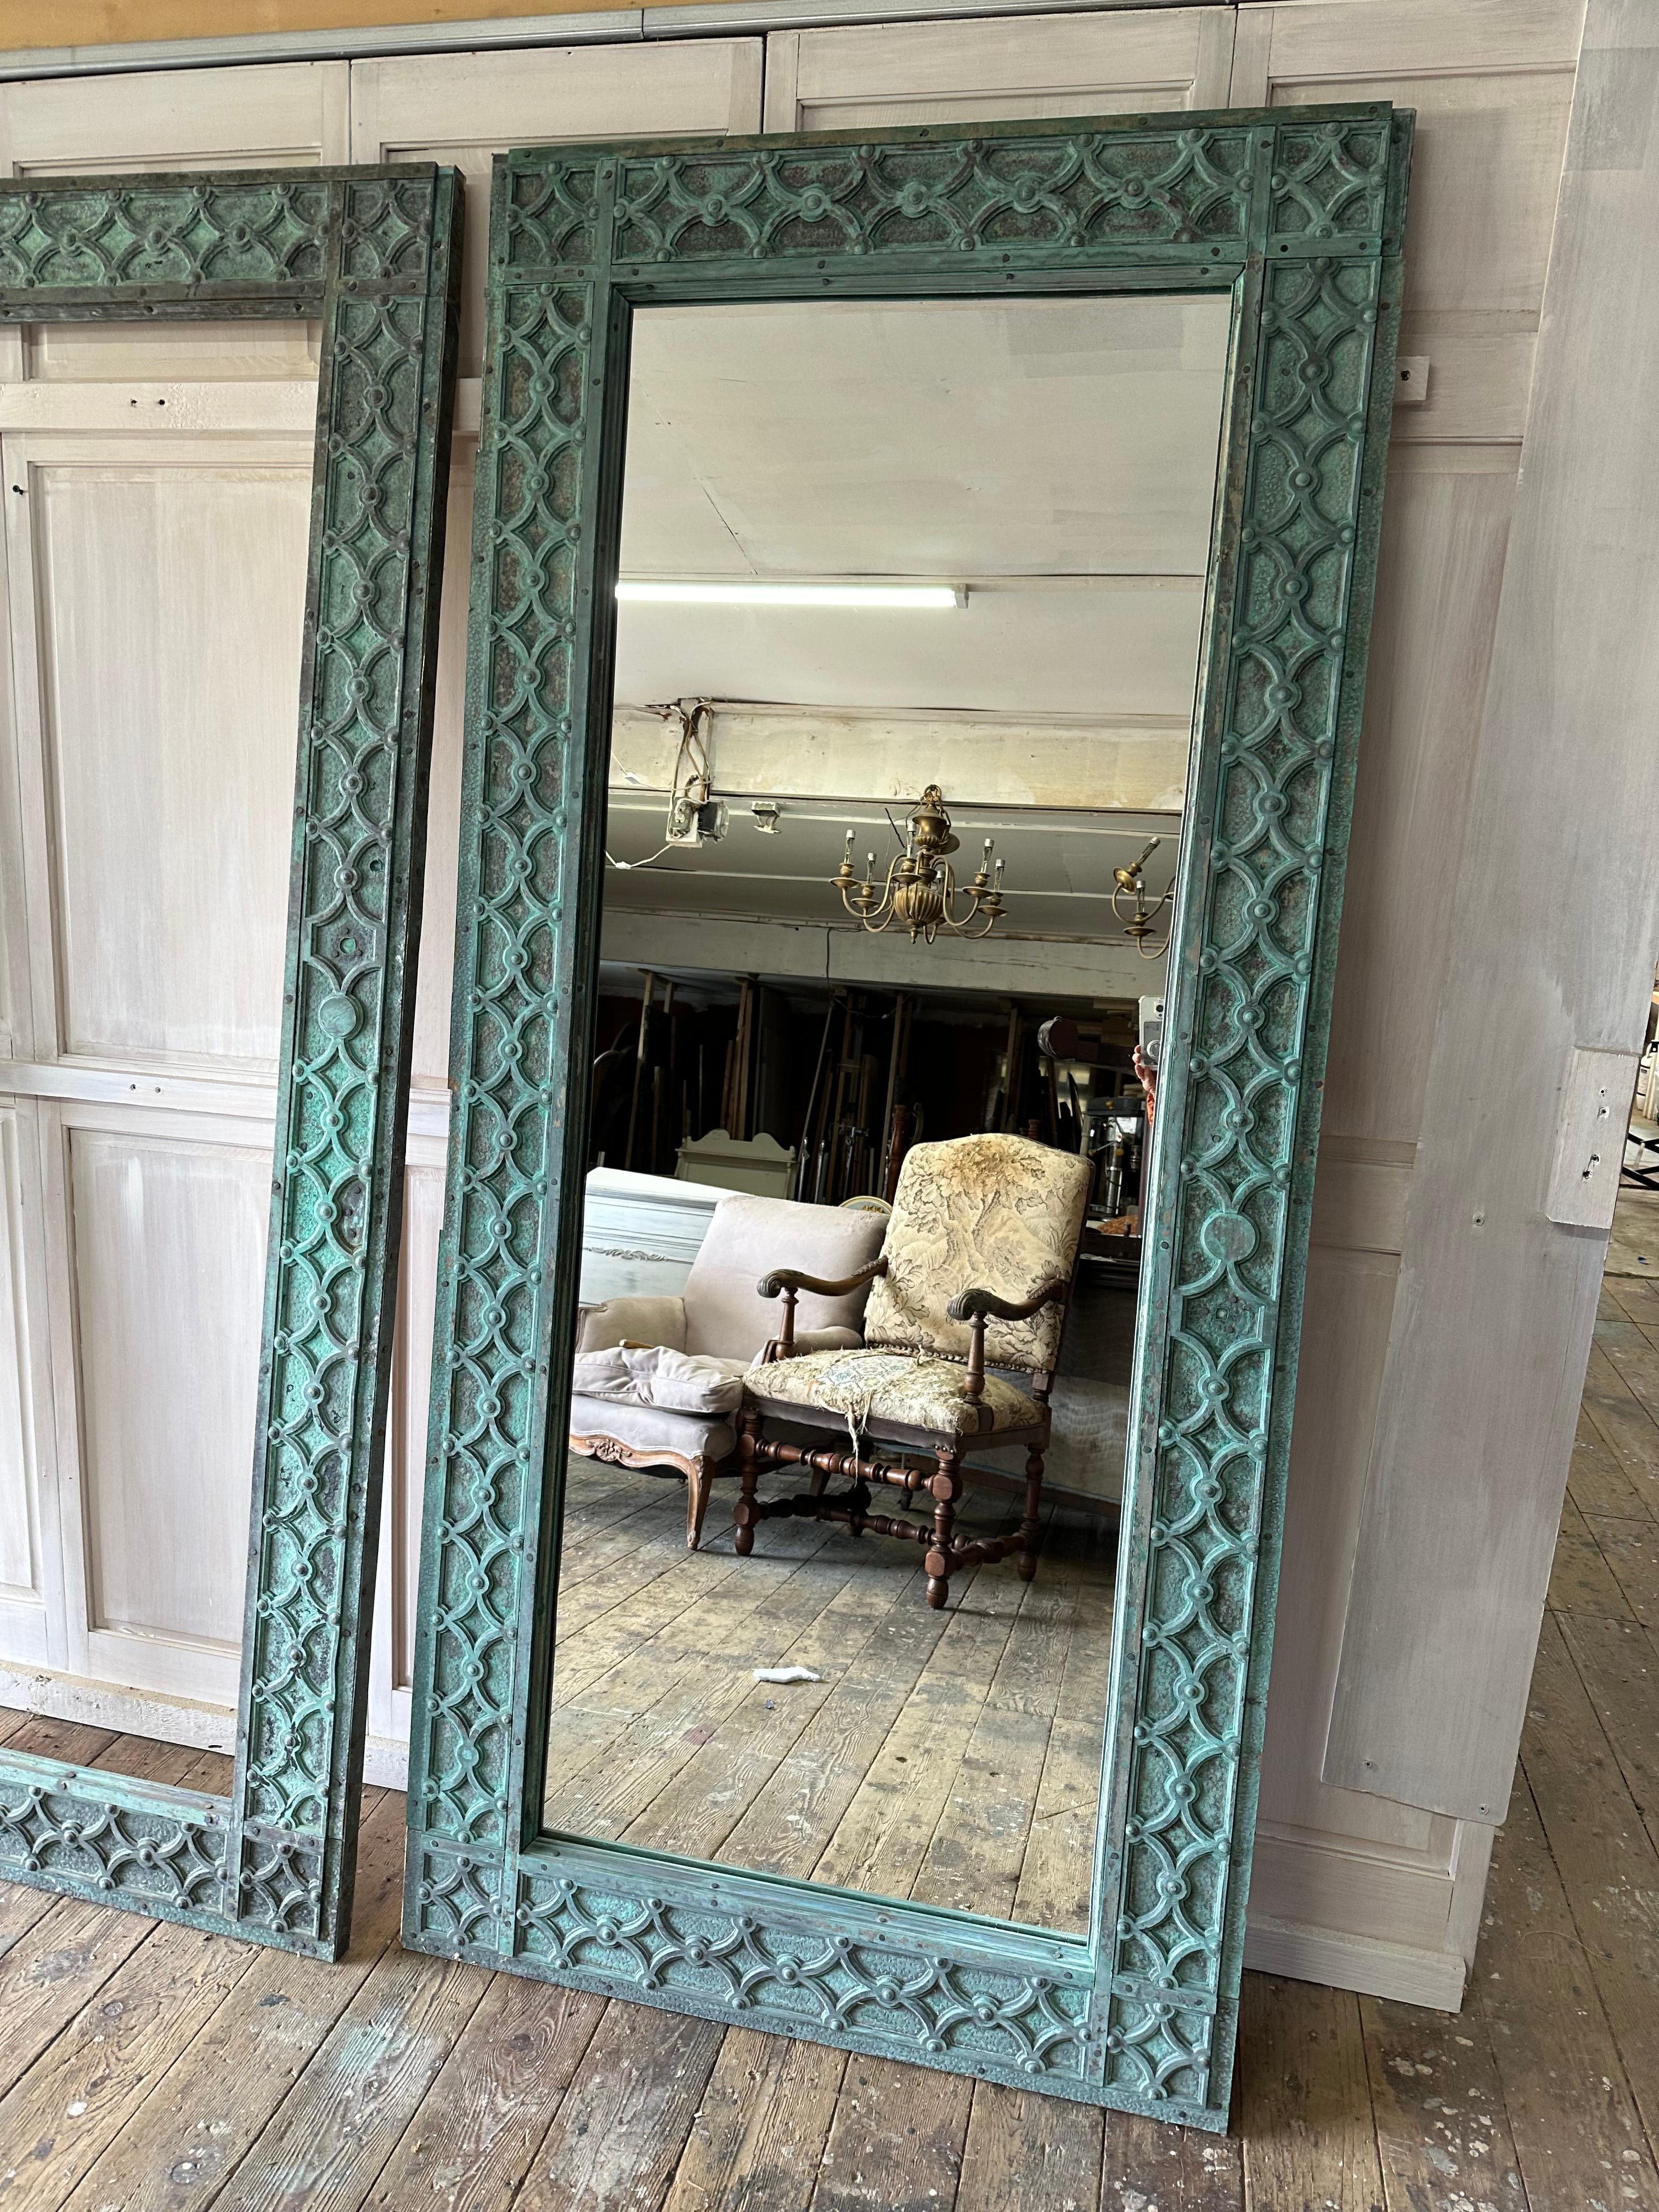 A very special and rare antique French bronze floor,  wall mirror with beautiful green verdigris. The detailed geometric low relief fretwork decorated mirror was once an antique door that has been lovingly restored, reworked and made into mirror